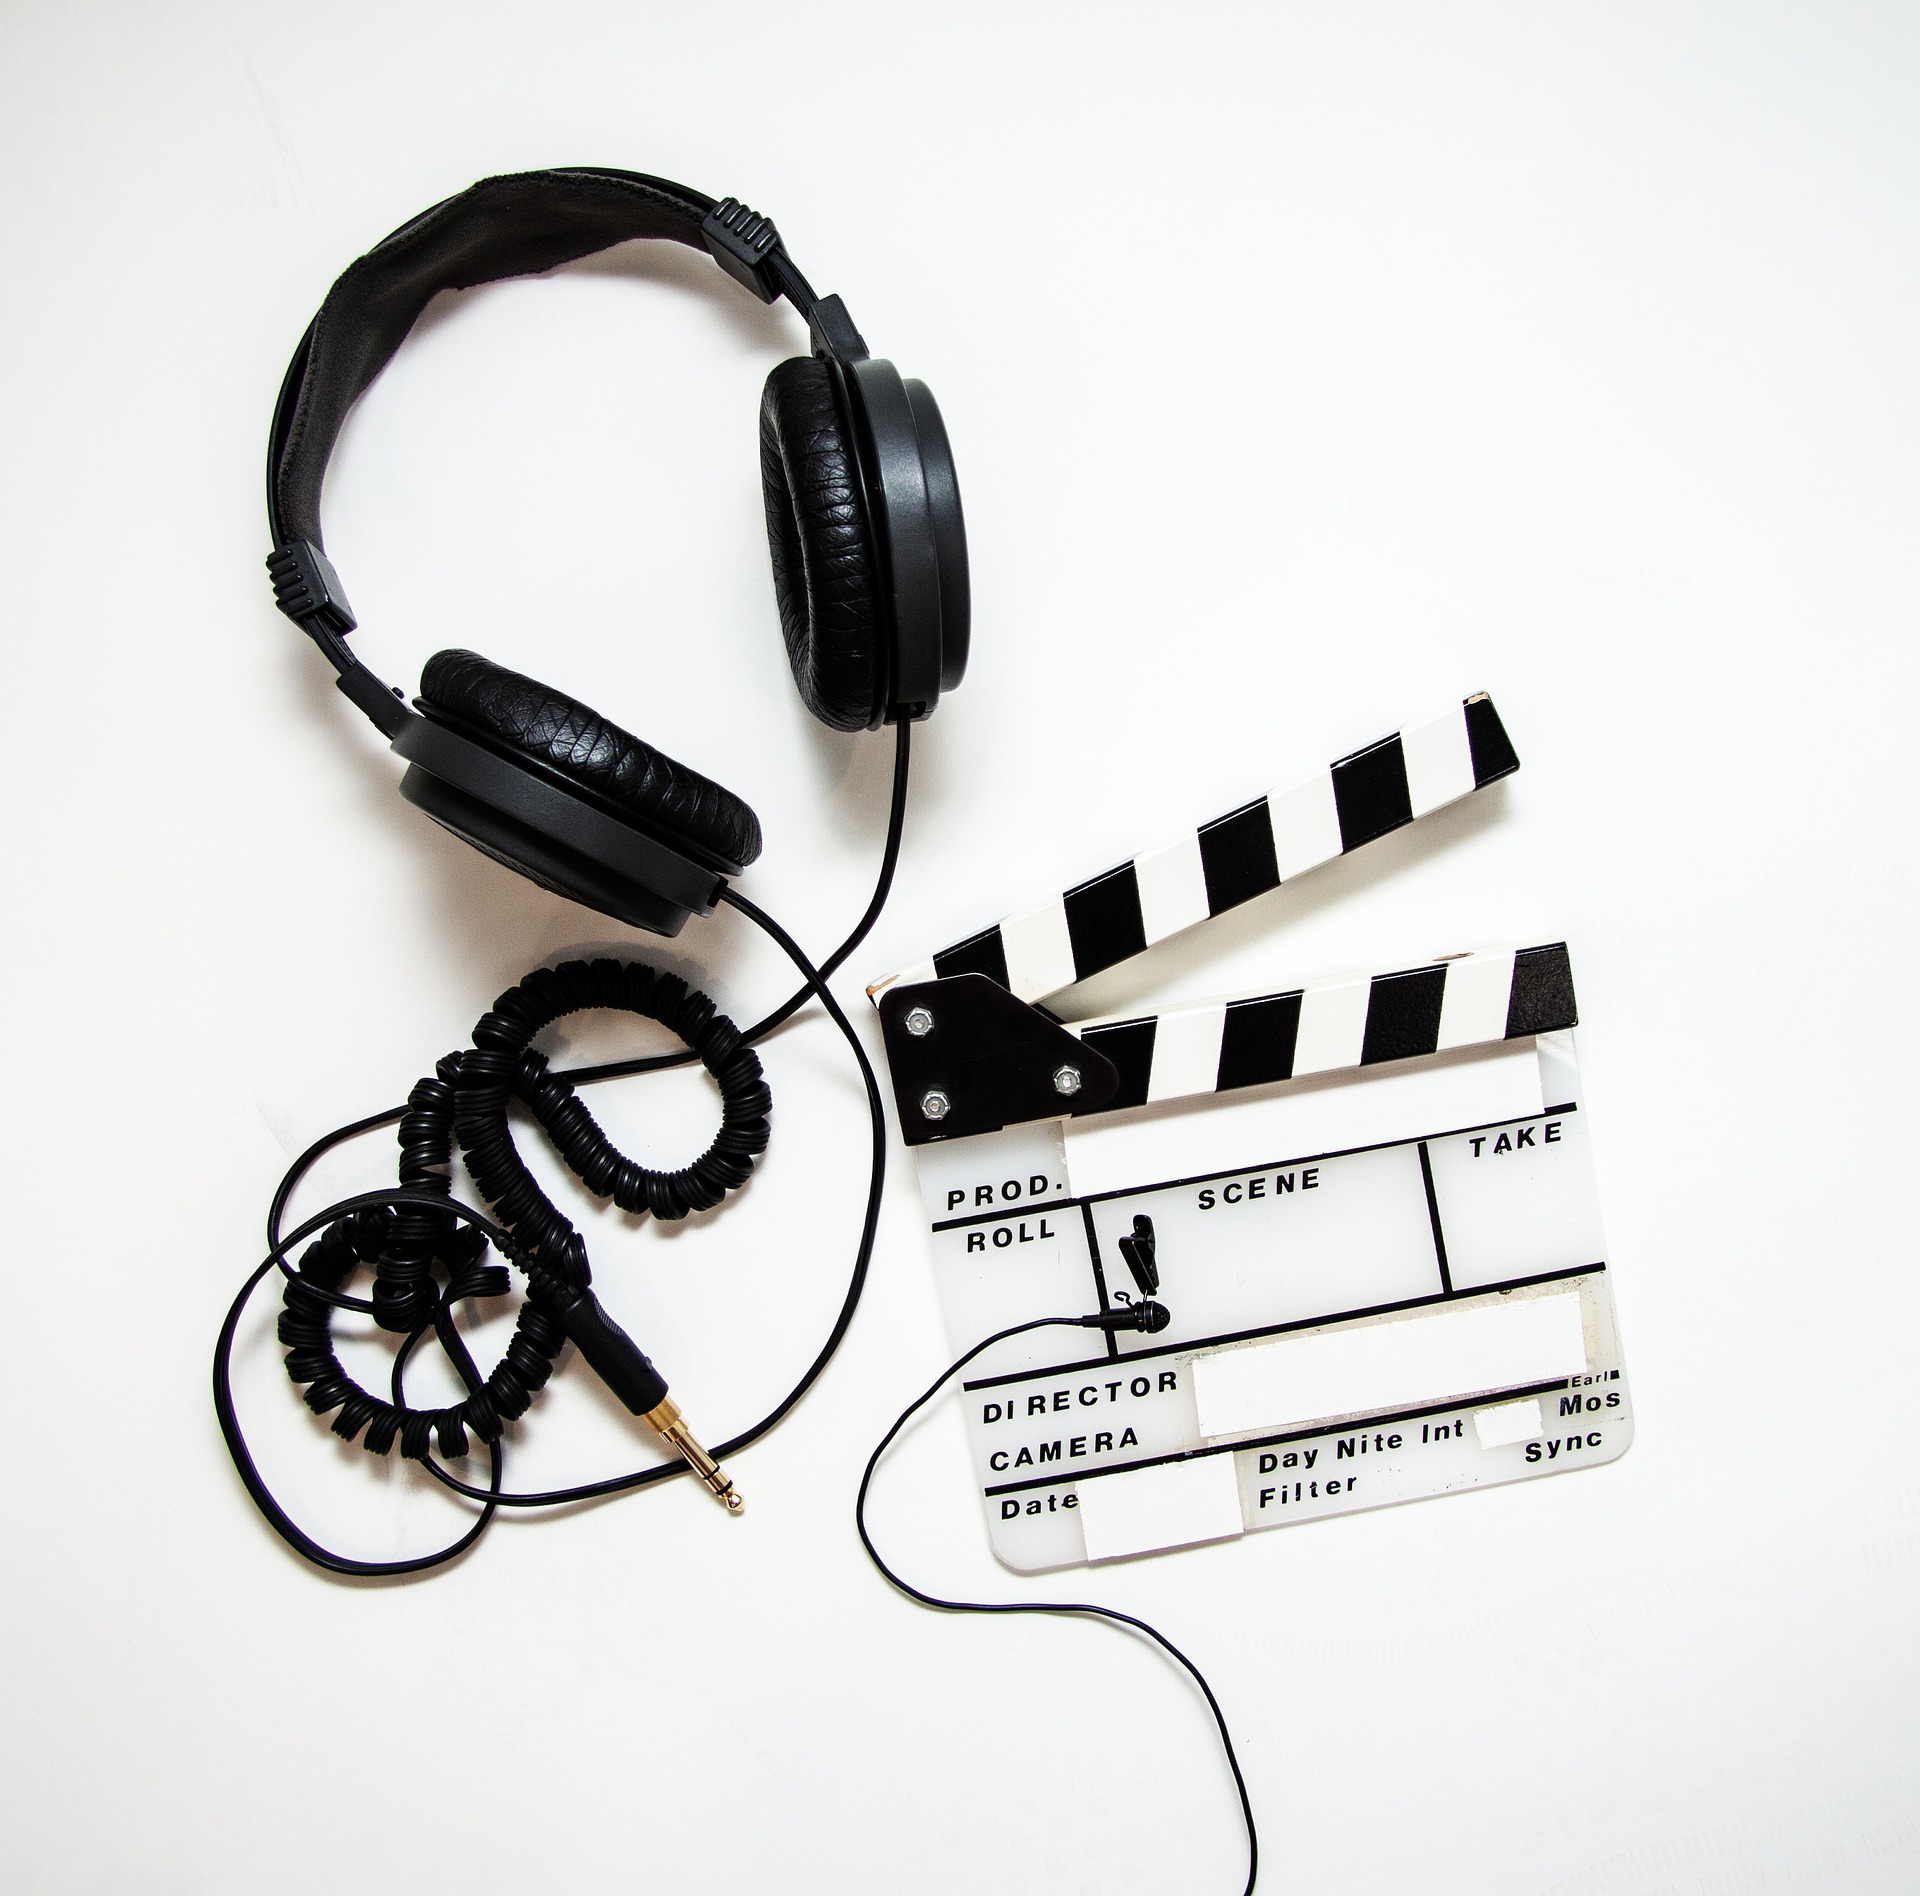 video recording equipment on a white background